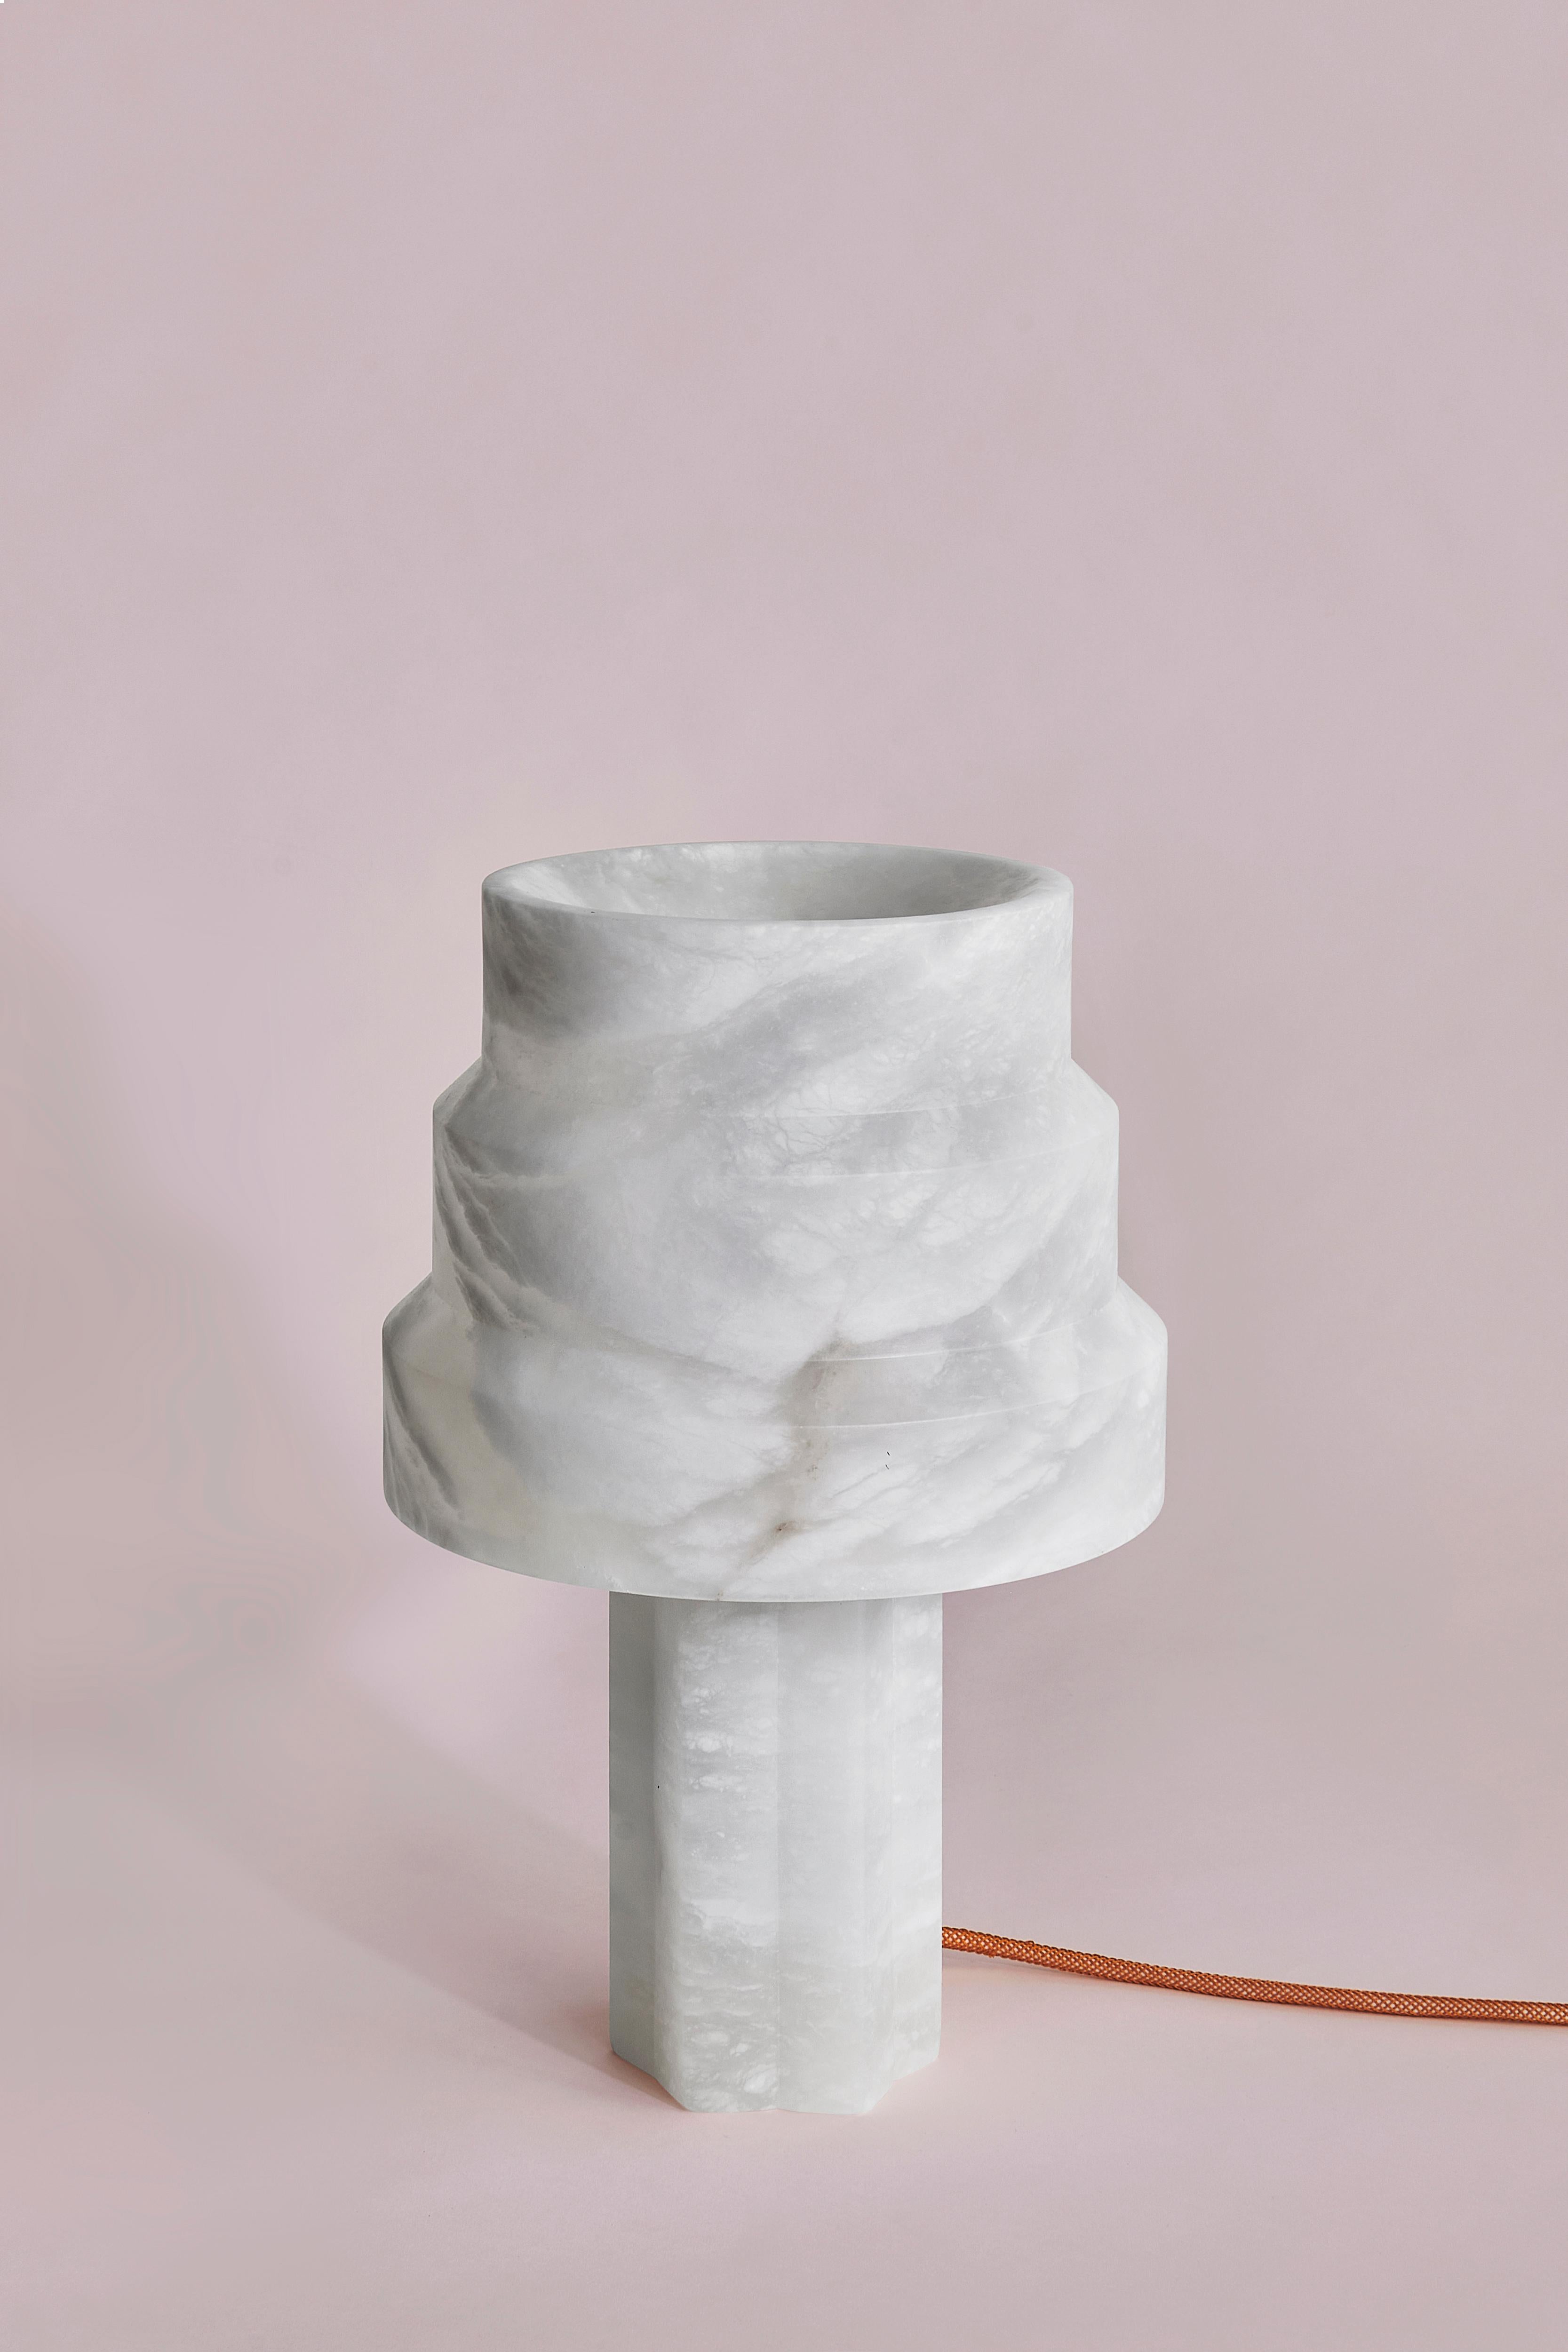 Scale Alabaster Lamp by SB26
Dimensions: W 24 x D 24 x H 36 cm
Materials: Alabaster, LED Source.

In a consistently geometric vocabulary, this family of lamps unveils the
translucent and organic nature of alabaster.
A contrast of shapes and